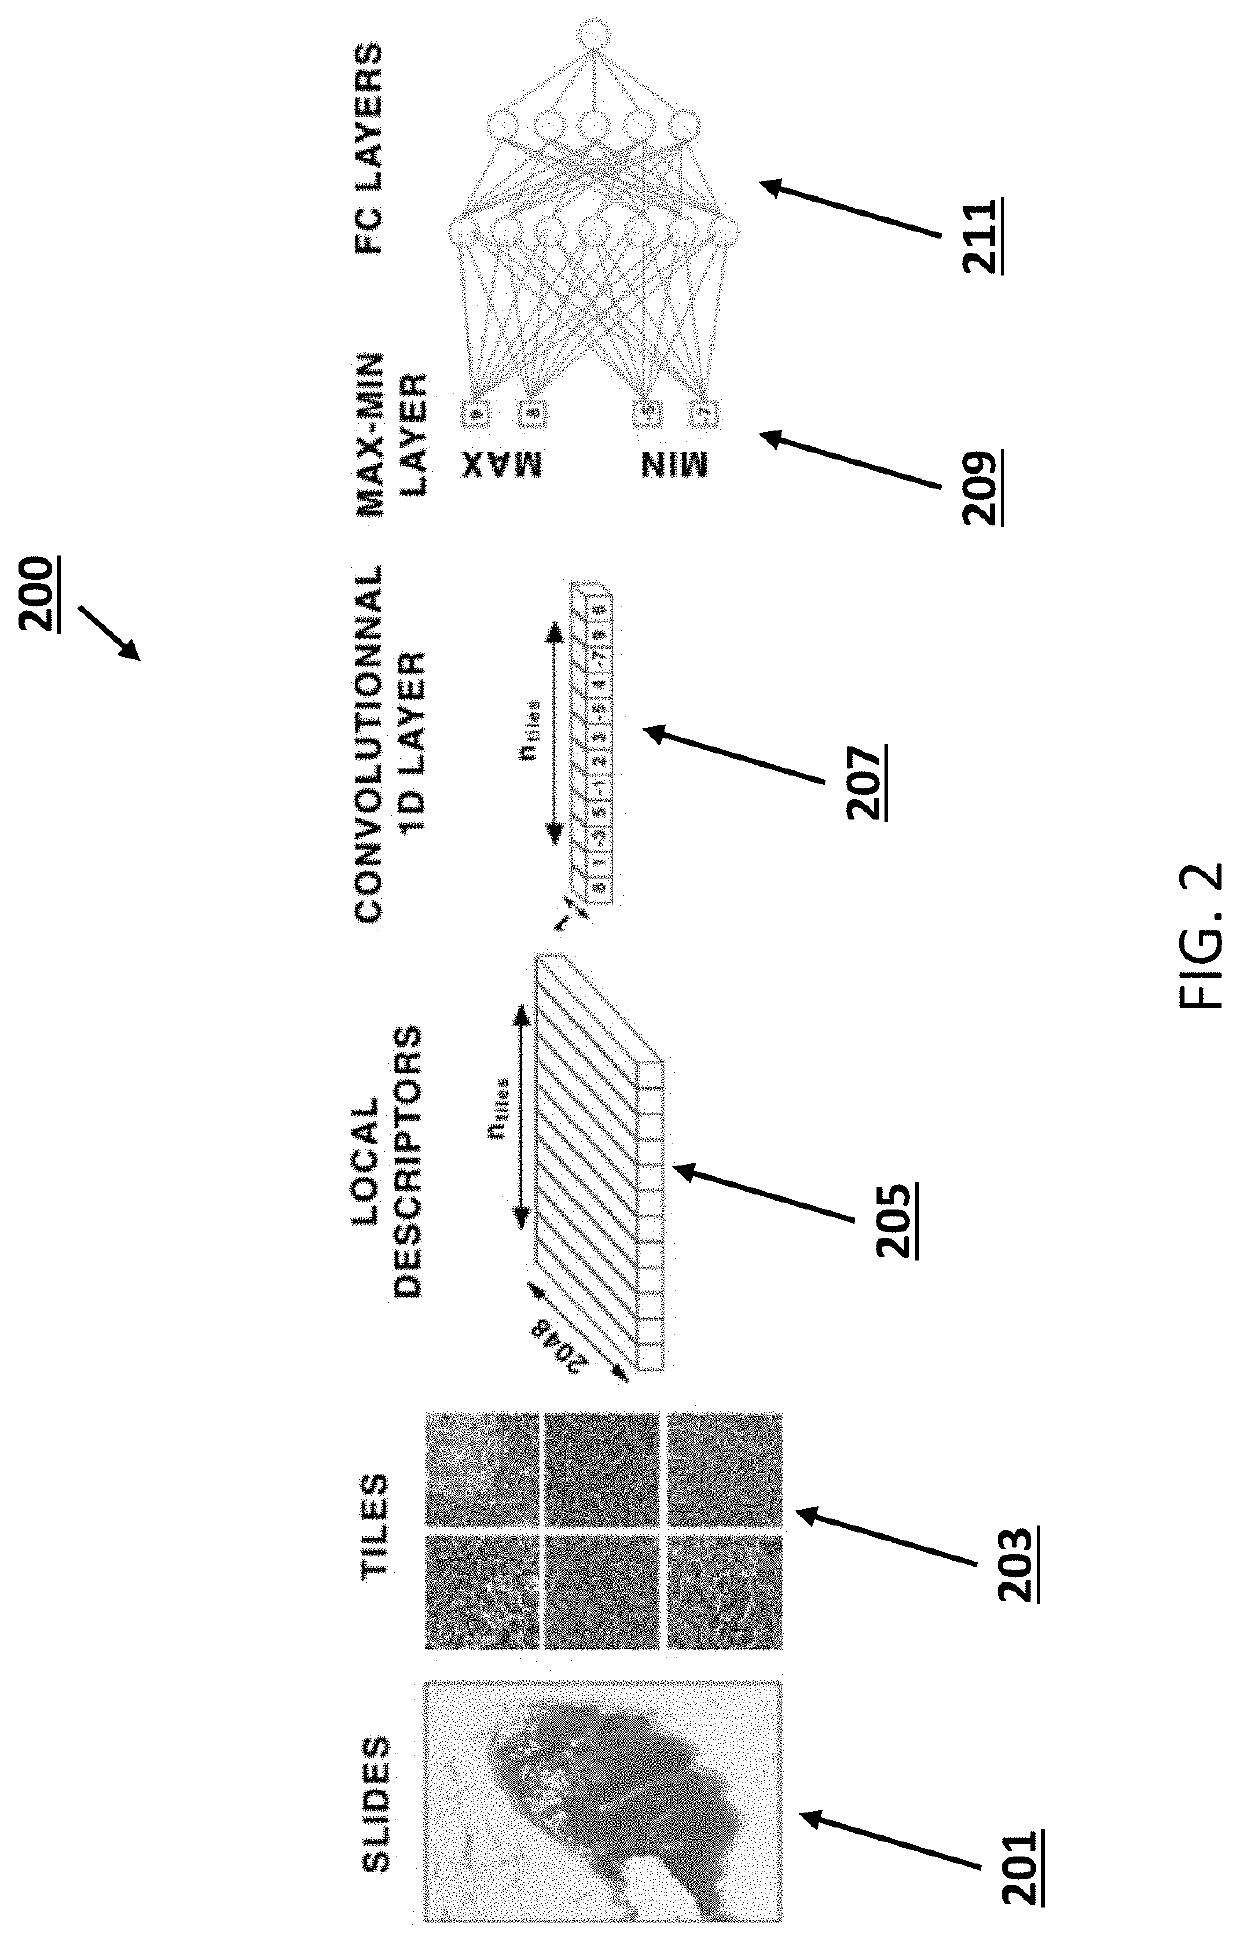 Systems and methods for image classification